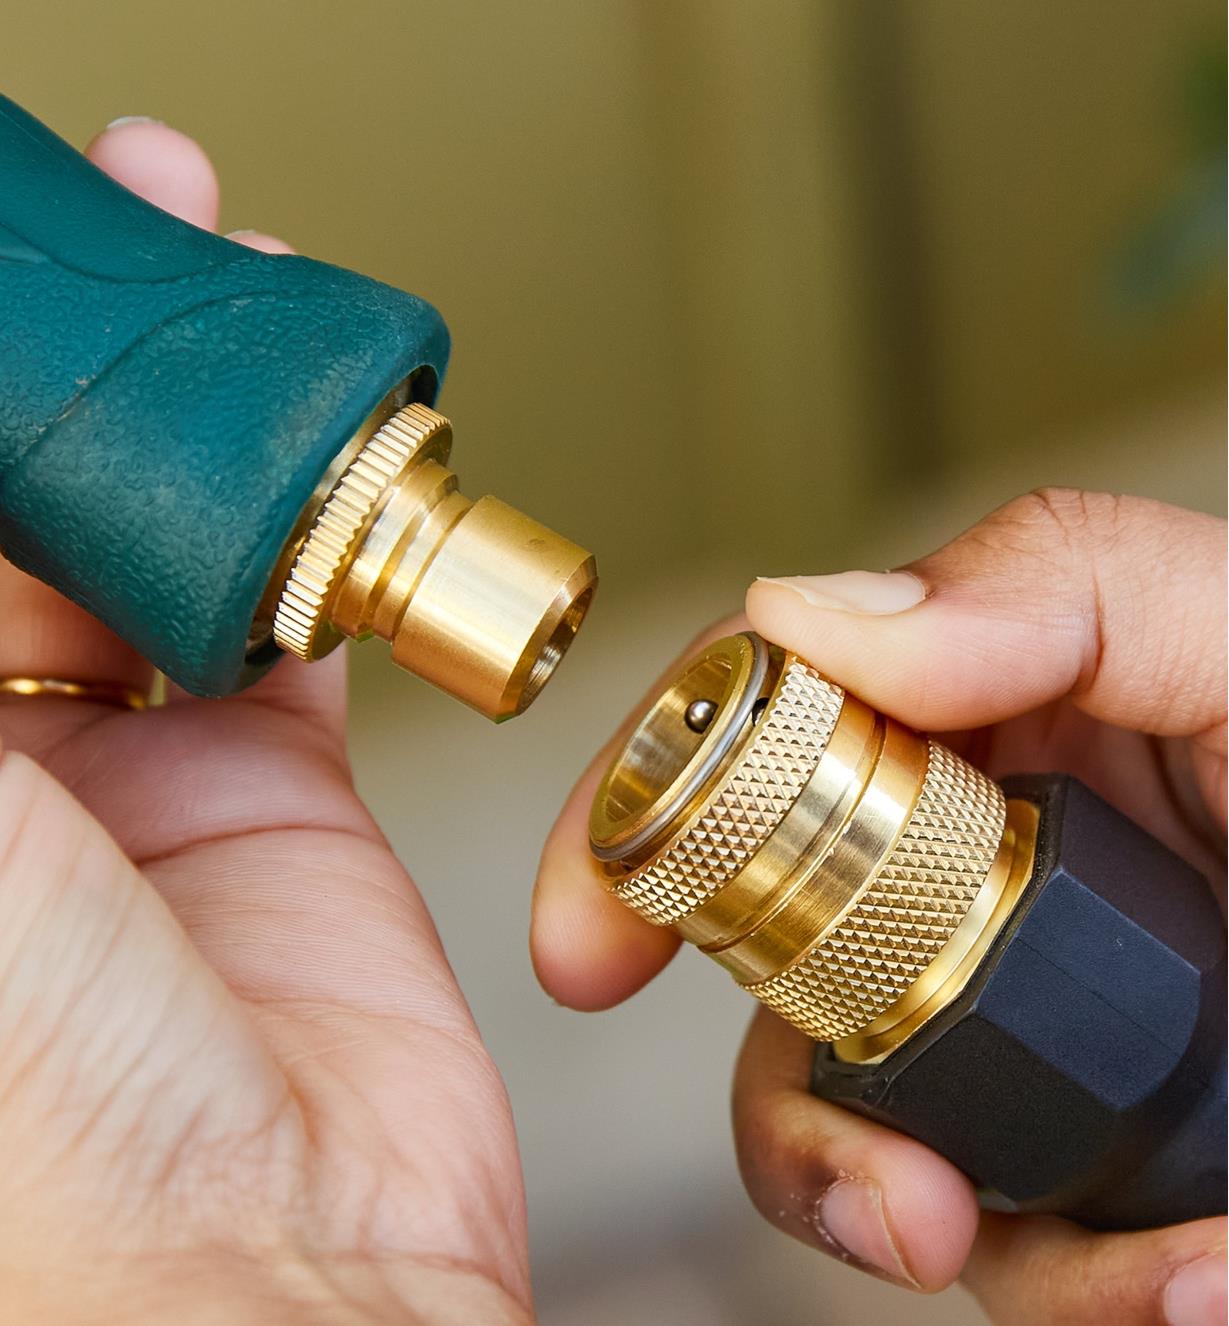 One hand holds a hose nozzle with a male tool adapter while the other holds the end of a hose with a female coupler attached